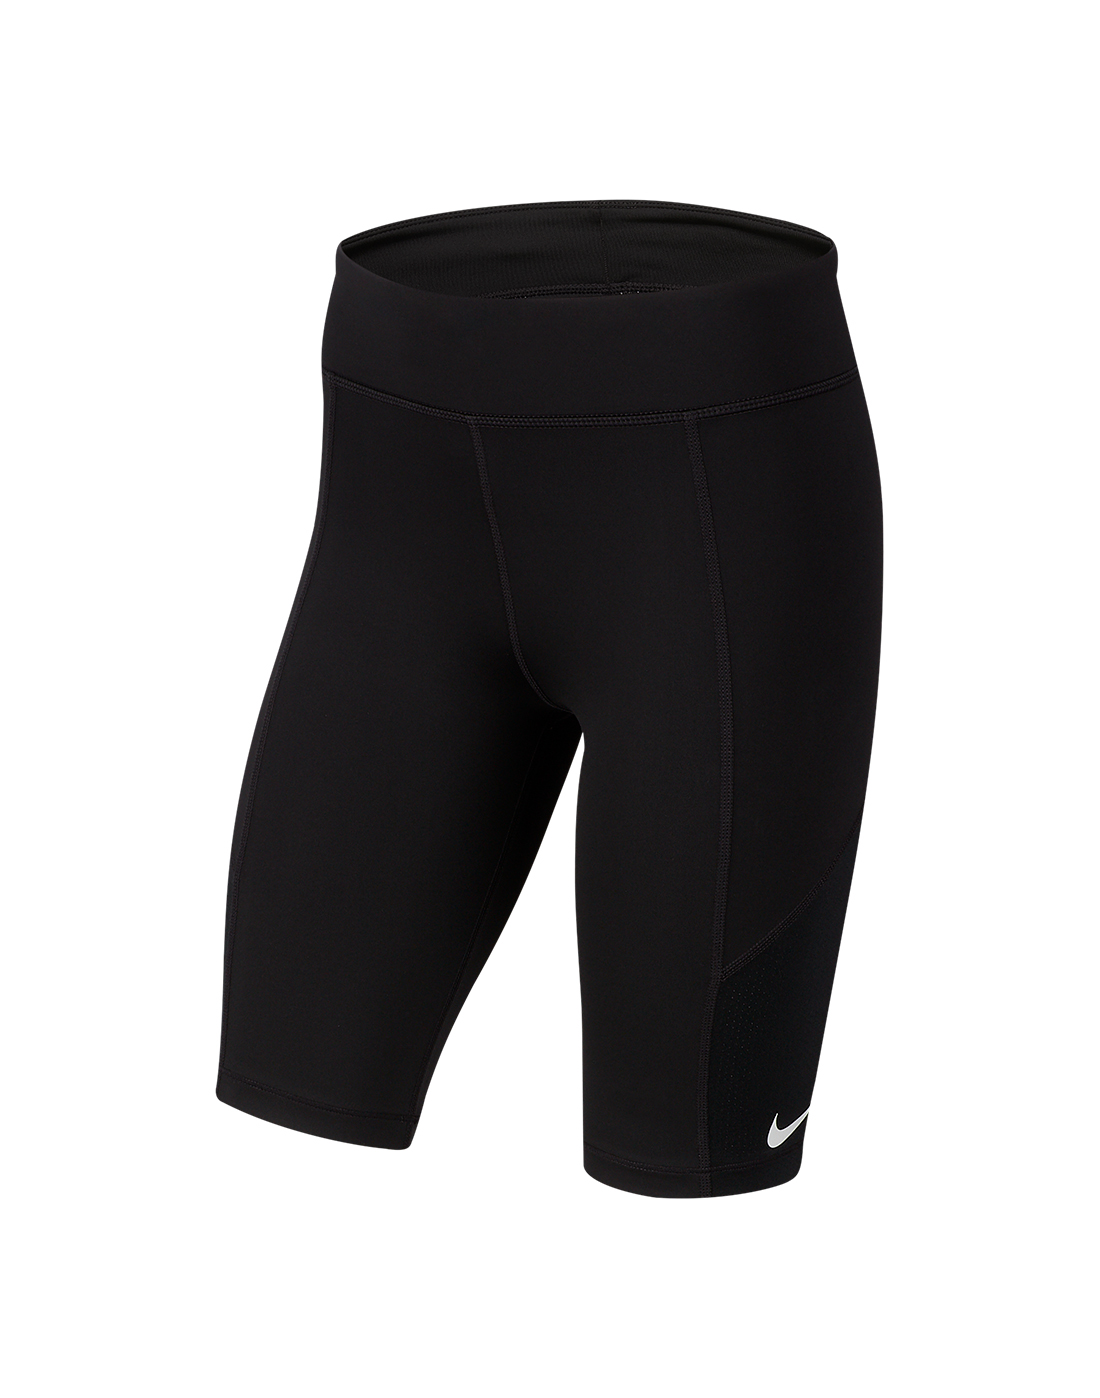 Nike Older Girls Trophy Cycling Shorts - Black | Life Style Sports IE